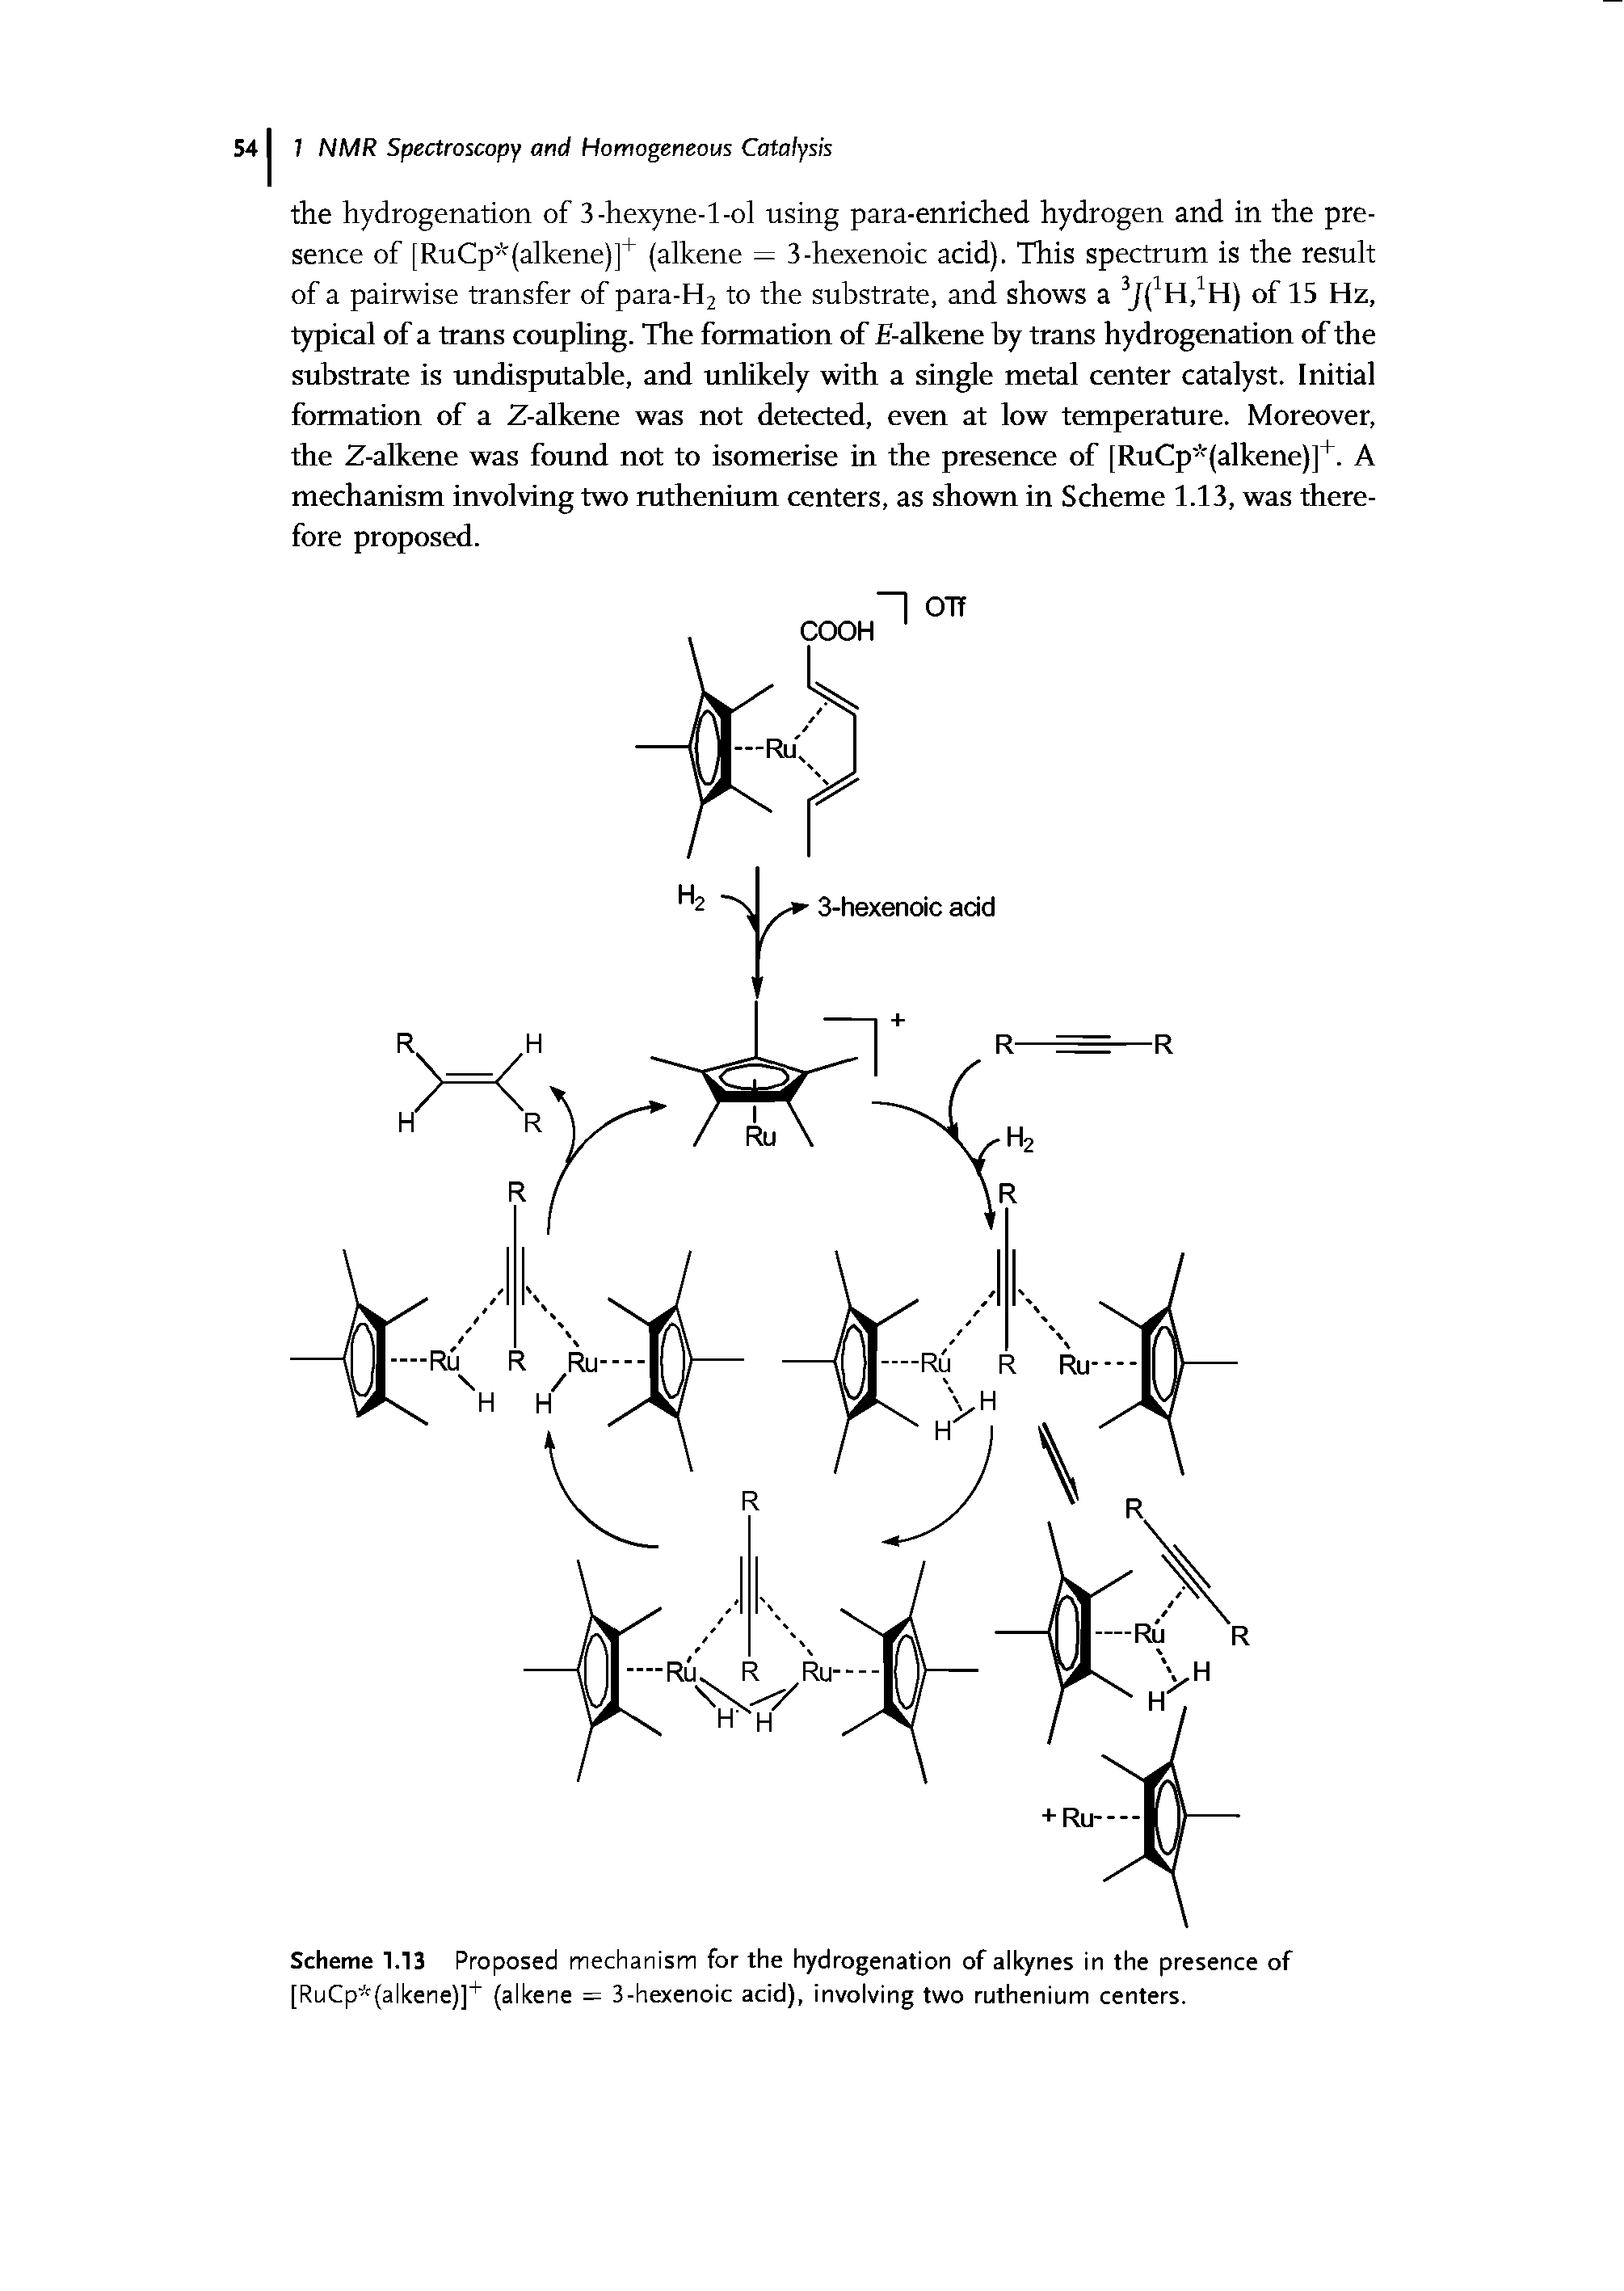 Scheme 1.13 Proposed mechanism for the hydrogenation of alkynes in the presence of [RuCp (alkene)] (alkene = 3-hexenoic acid), involving two ruthenium centers.